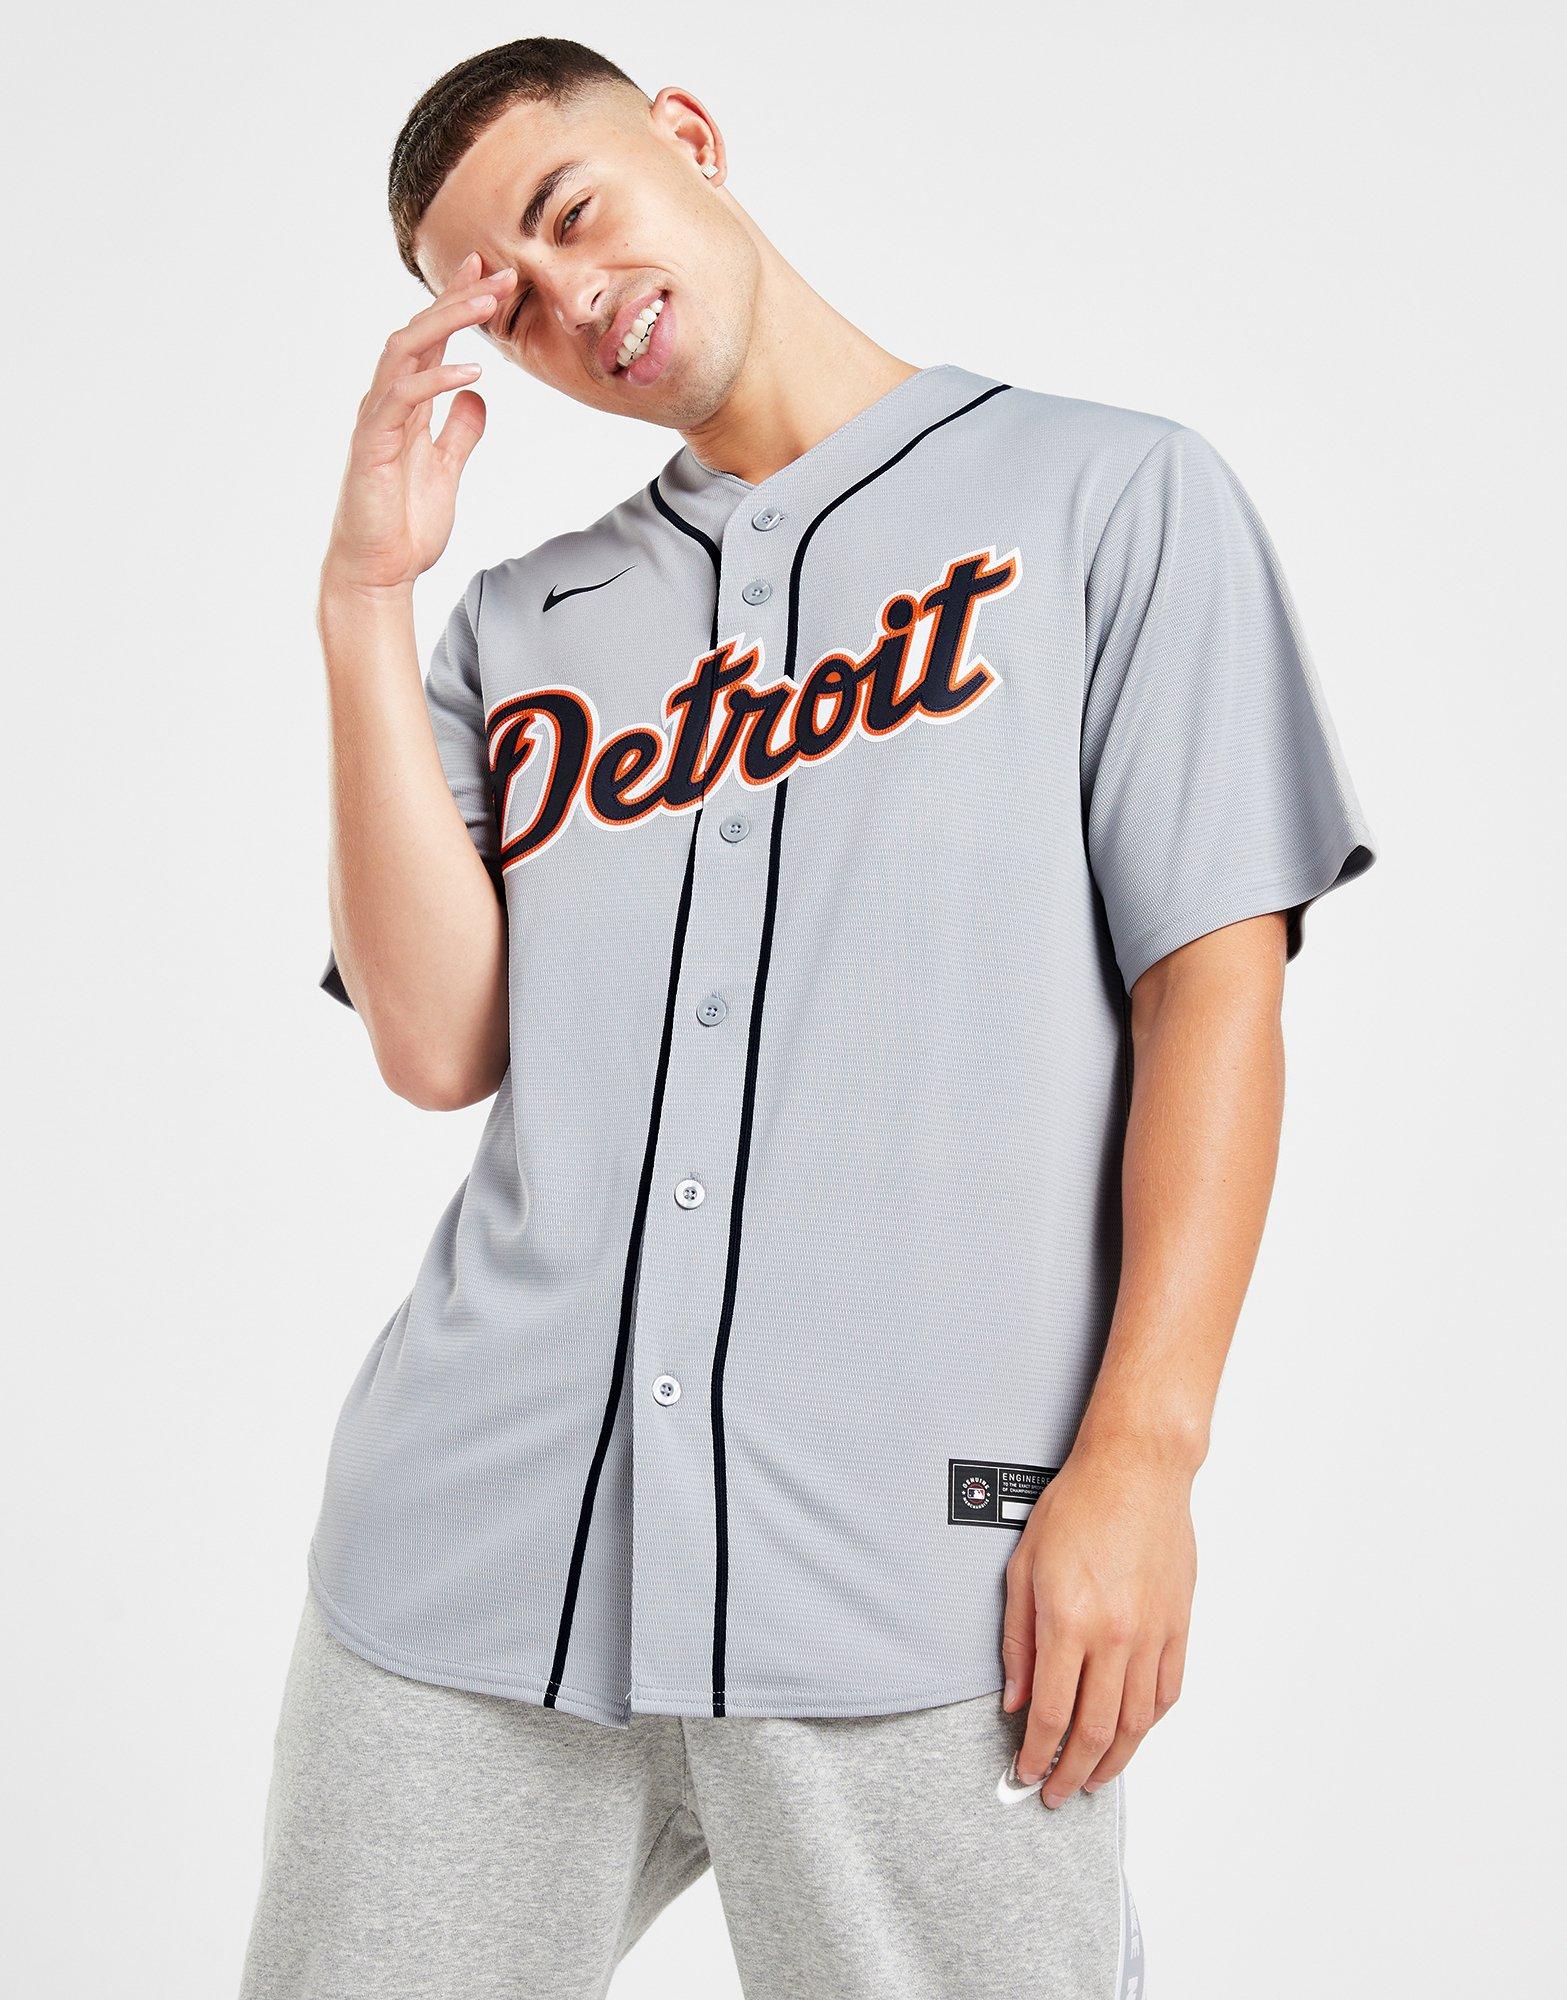 MLB Detroit Tigers Infant Boys' Pullover Jersey - 12M